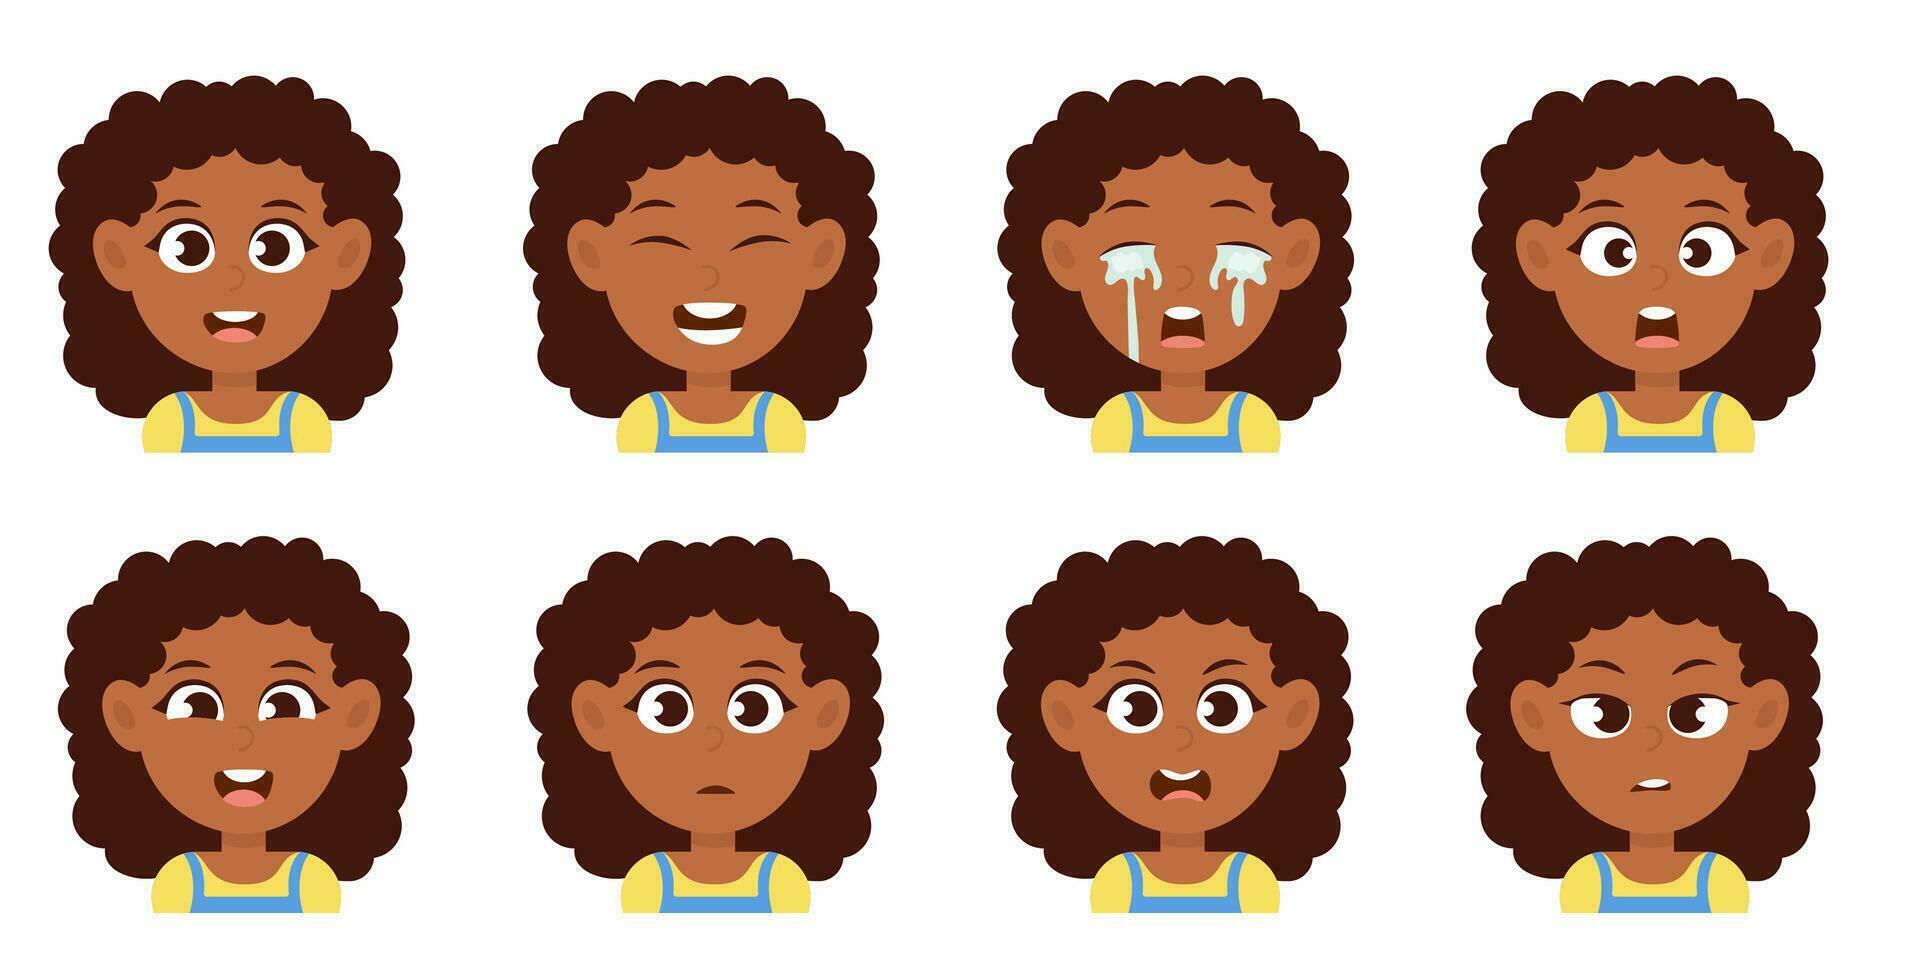 Dark skin cute little girl avatar with different facial expression vector